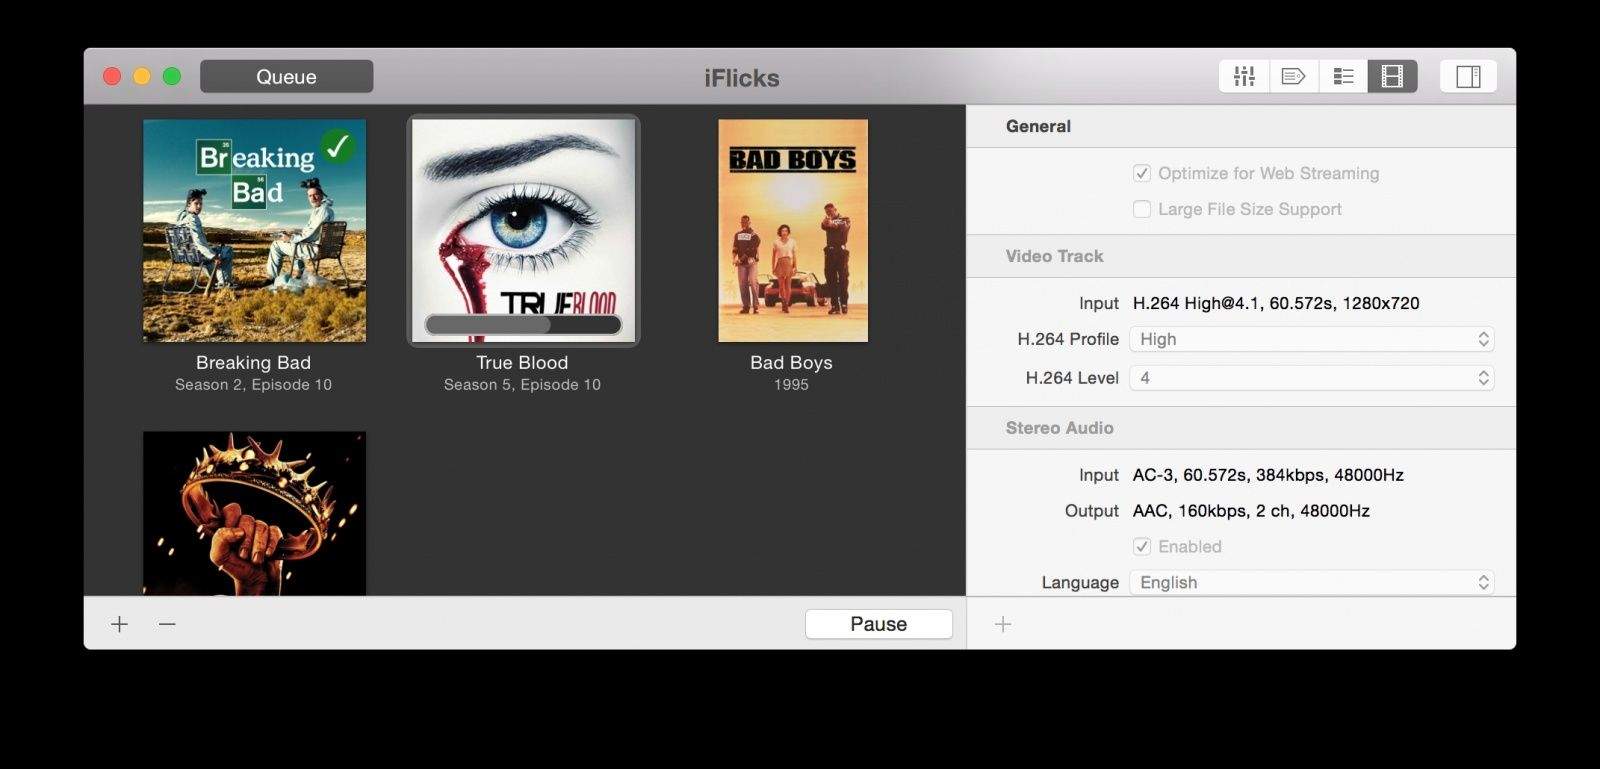 iFlicks makes it easy to import all your videos into iTunes. Photo: iFlicks